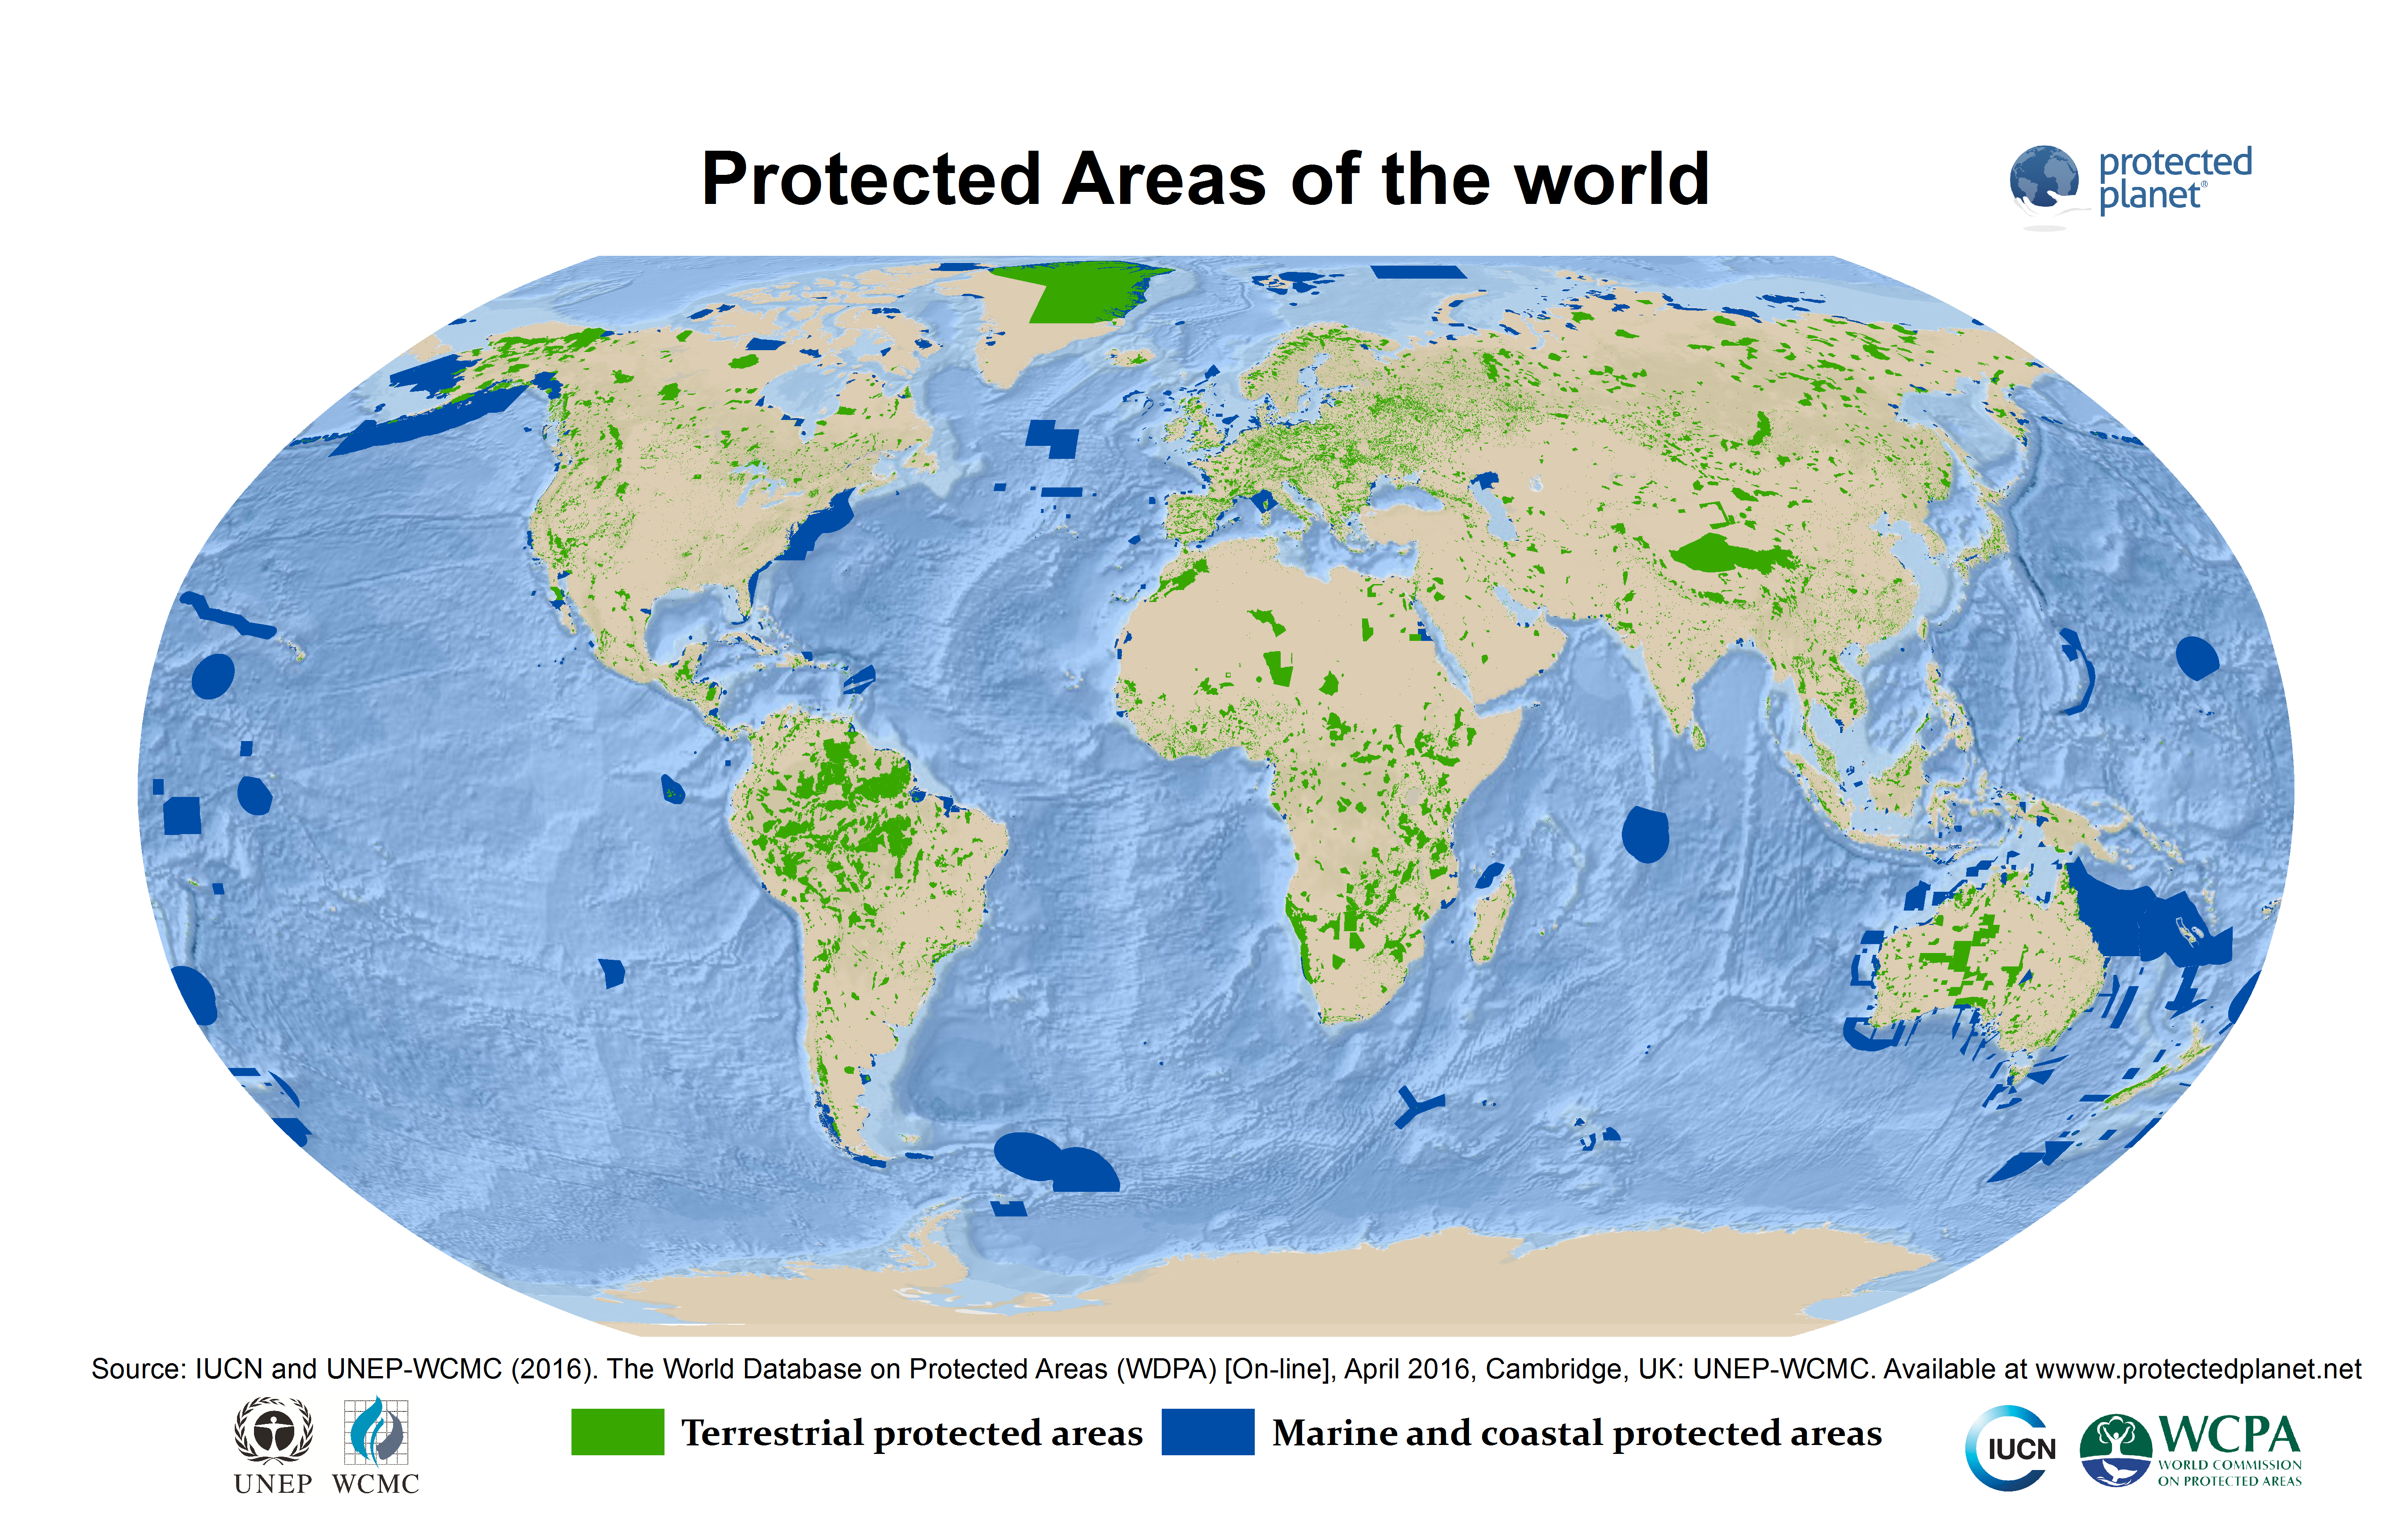 A map of worldwide protected areas, in both terrestrial and marine/coastal regions.